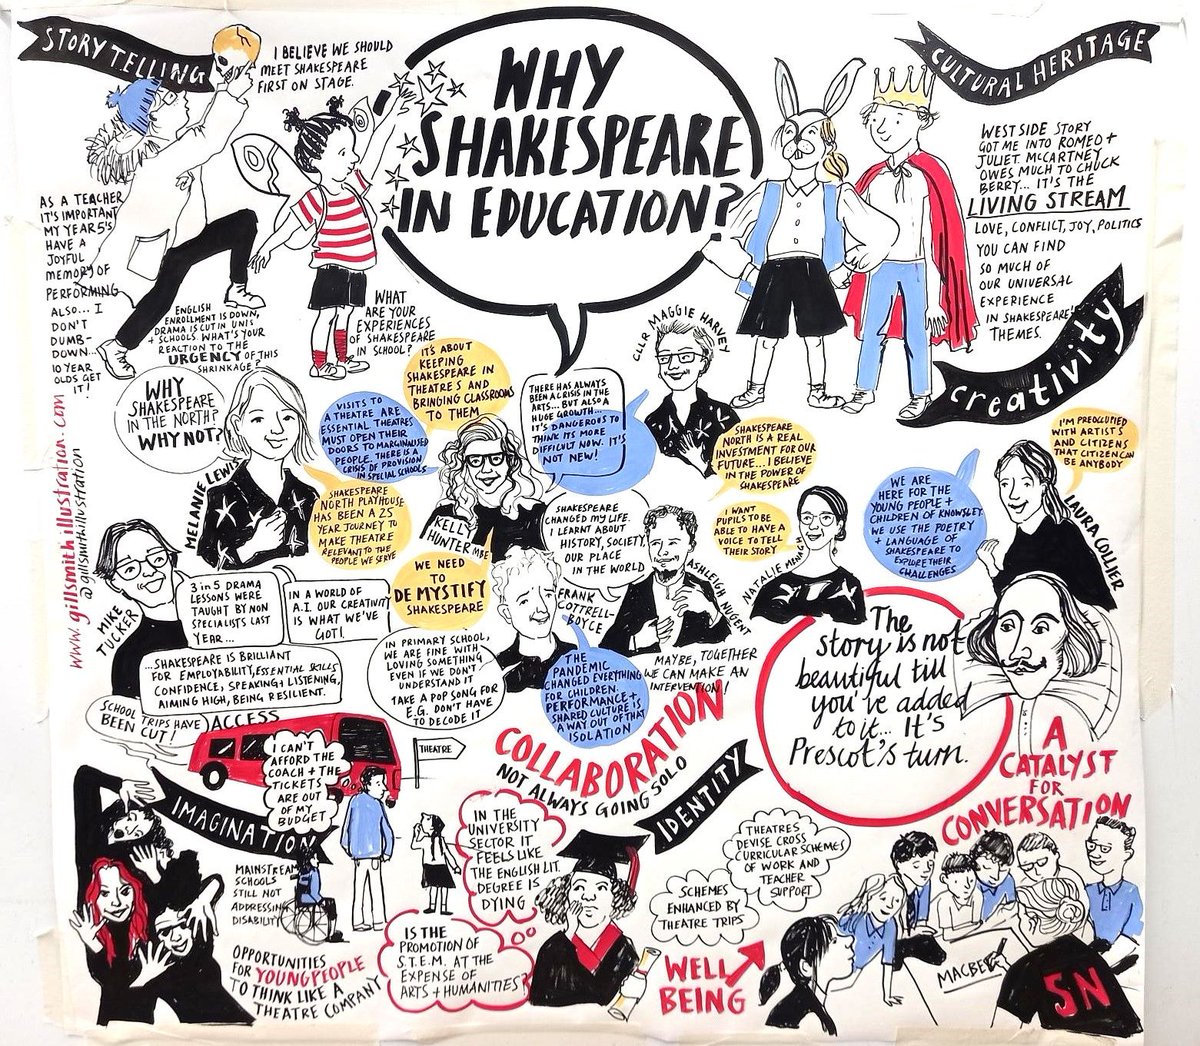 Last month, Head of Coram Shakespeare Schools Foundation, Mike Tucker, attended a sector discussion event on the importance of Shakespeare in education. Find out what the attendees had to say: shakespeareschools.org/news/post?id=62